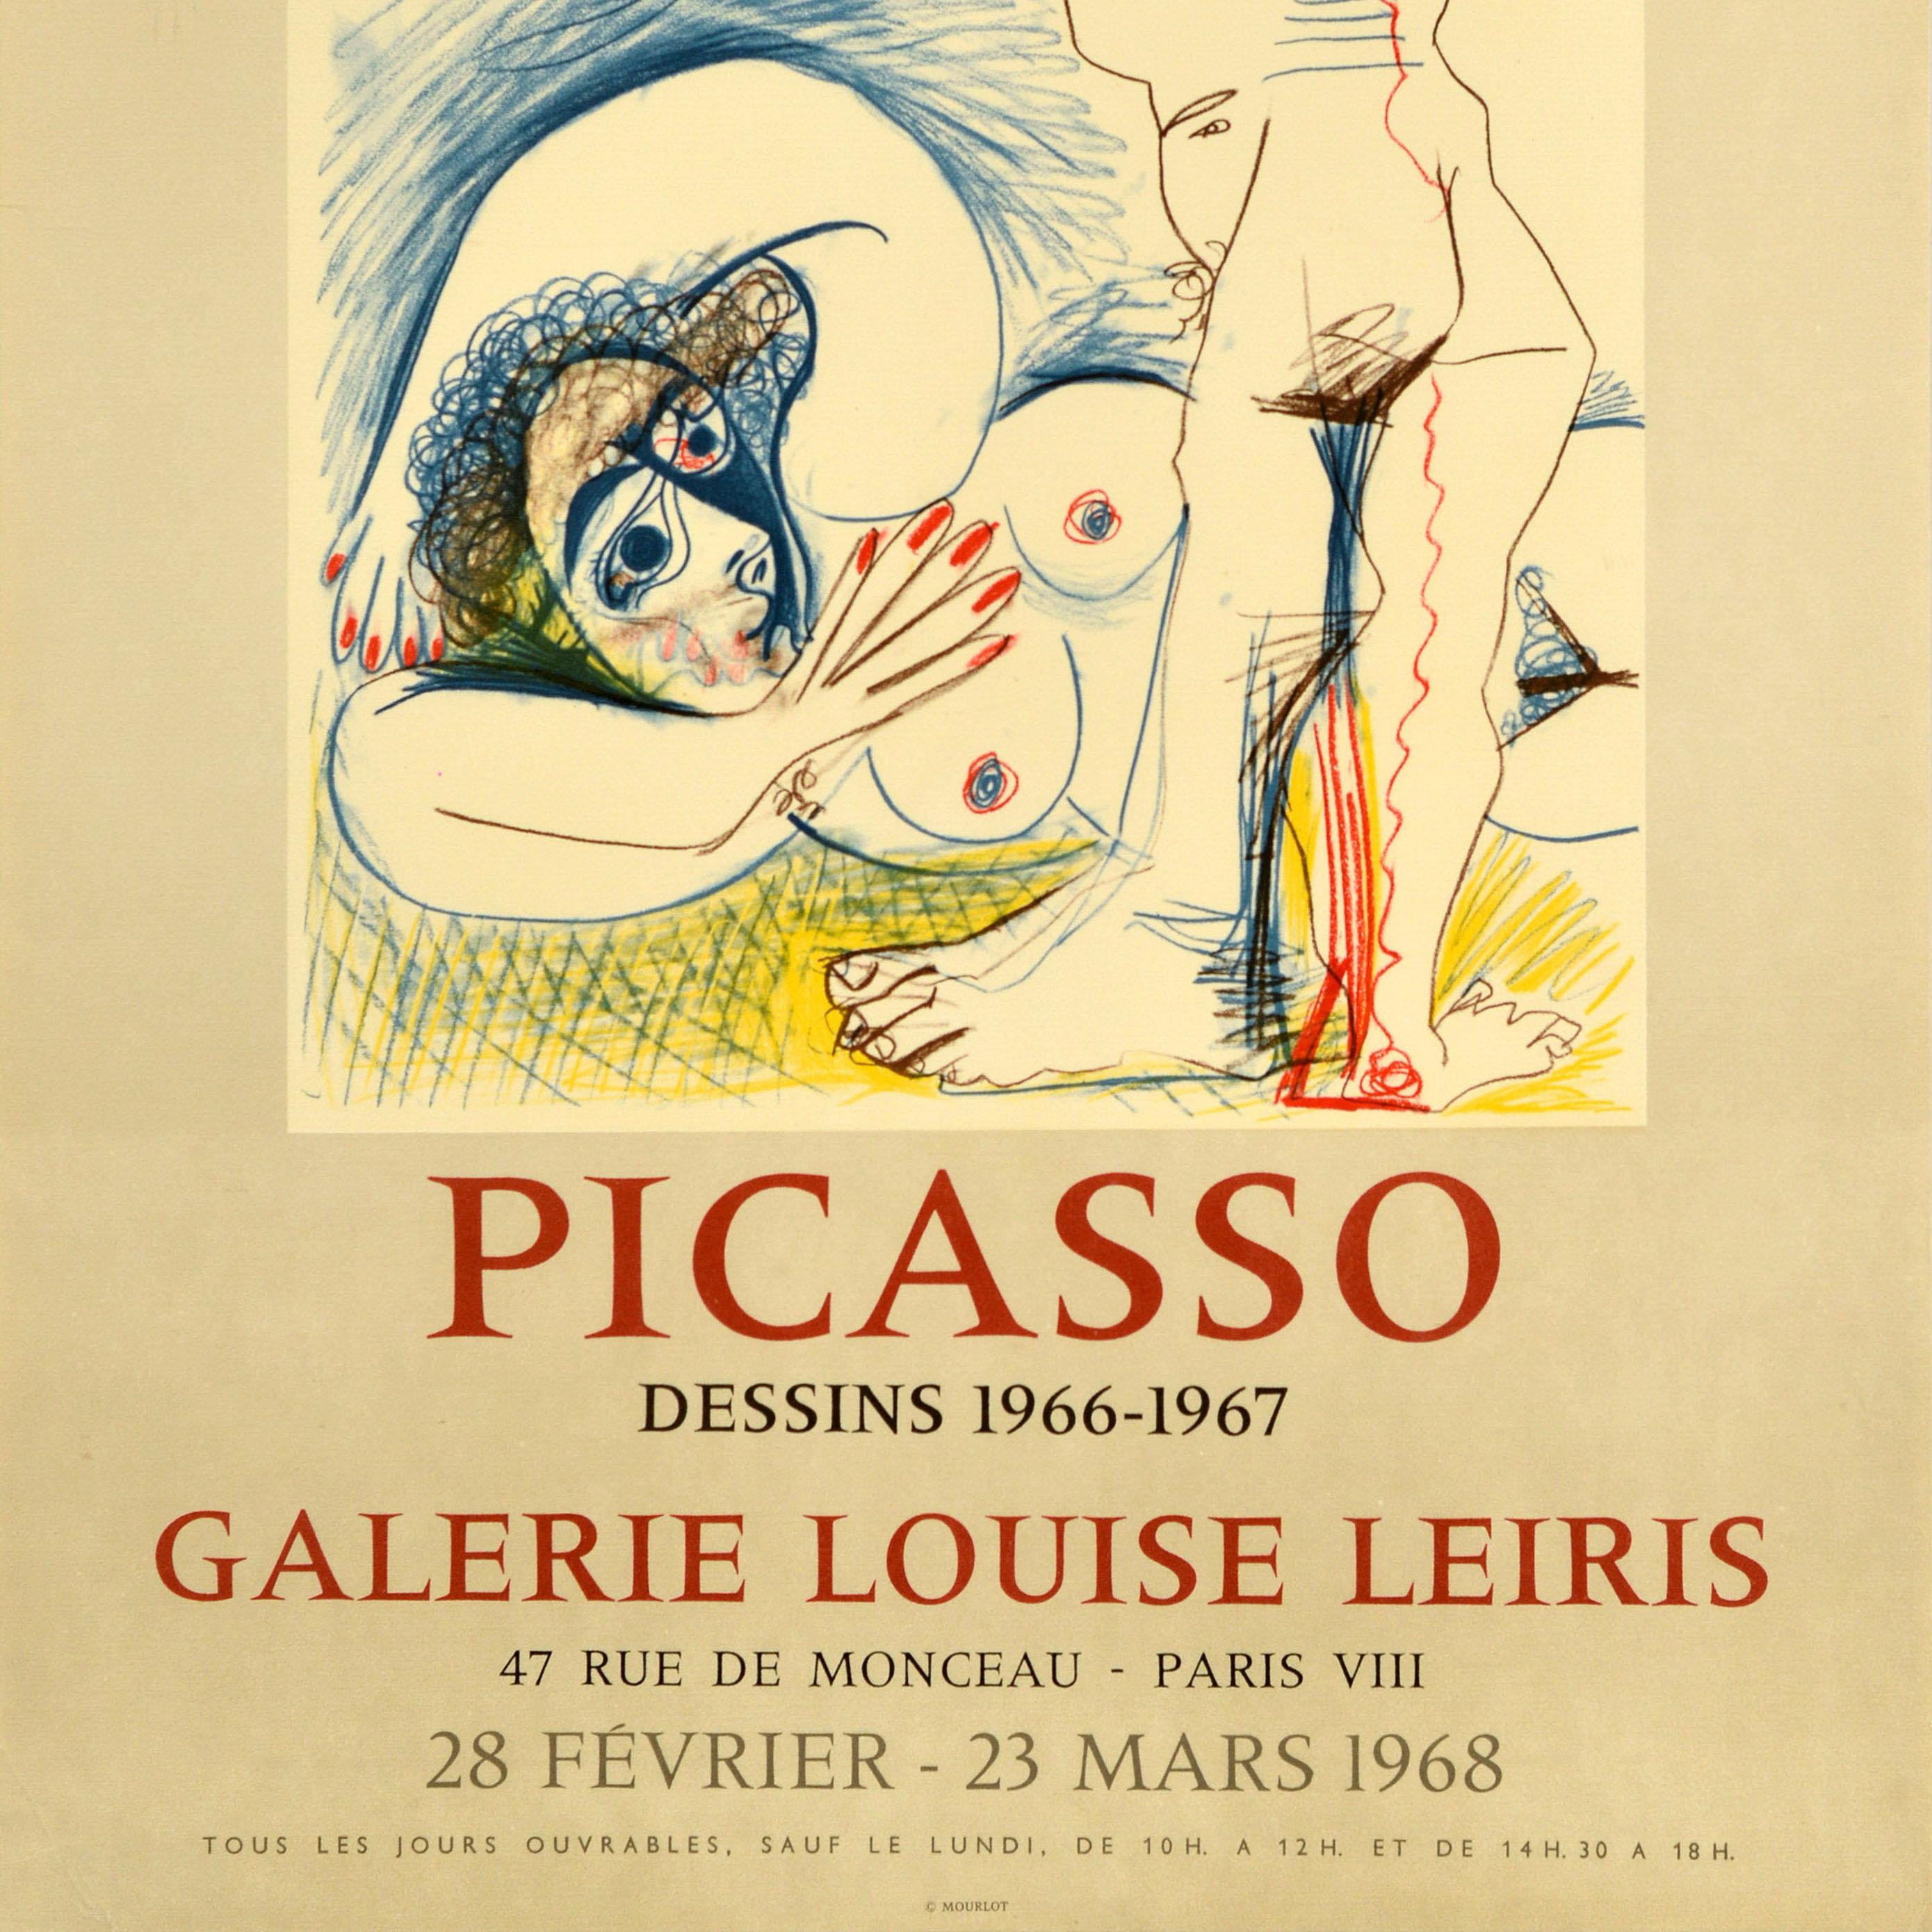 Original Vintage Art Exhibition Poster Picasso Drawings Galerie Louise Leiris - Orange Print by Pablo Picasso